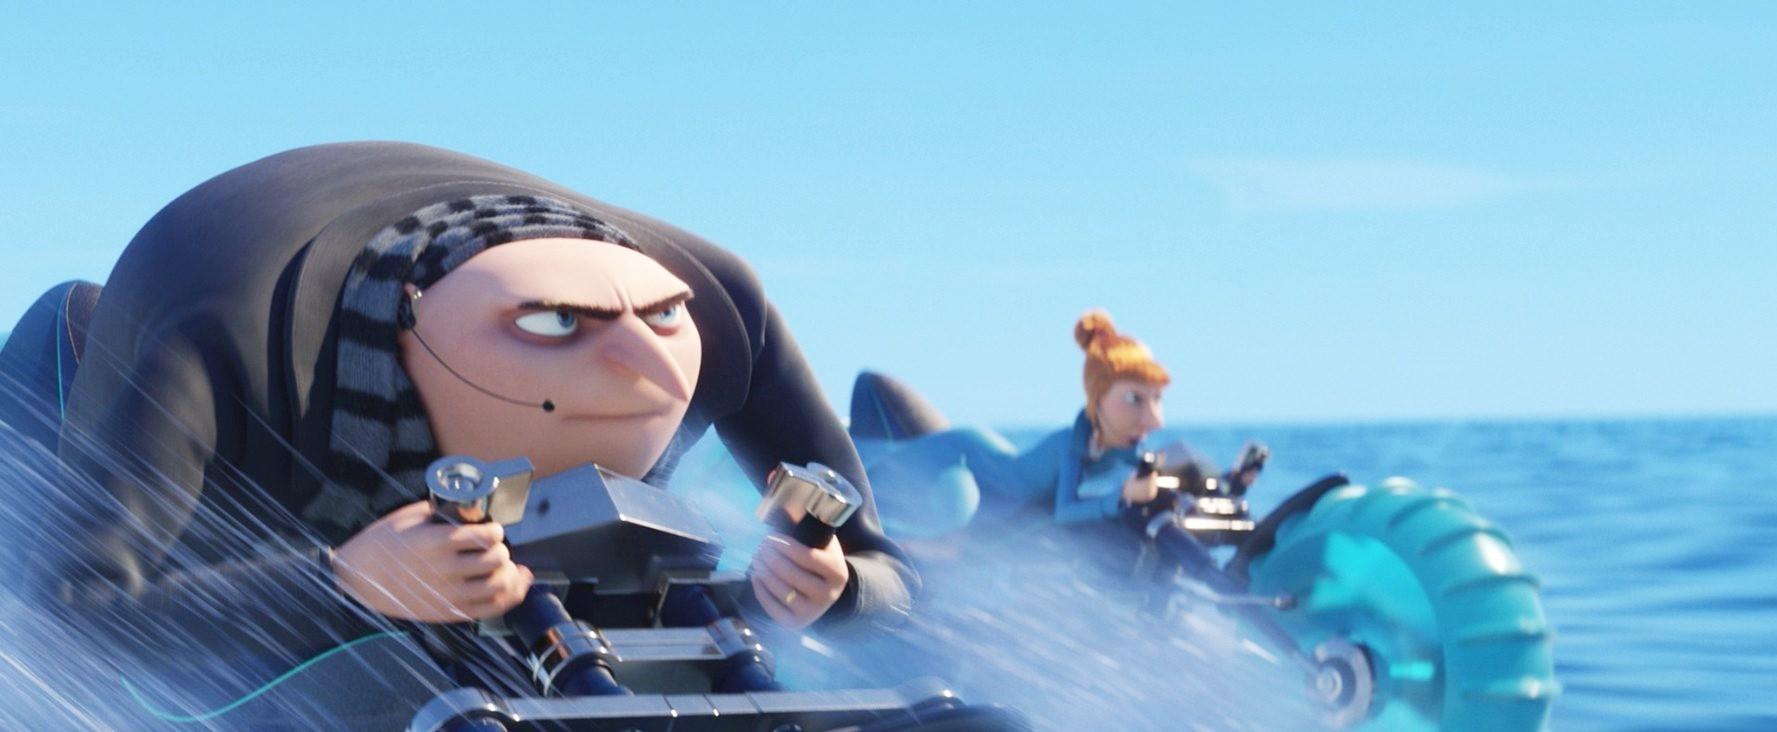 Gru and Lucy Wilde from Universal Pictures' Despicable Me 3 (2017)